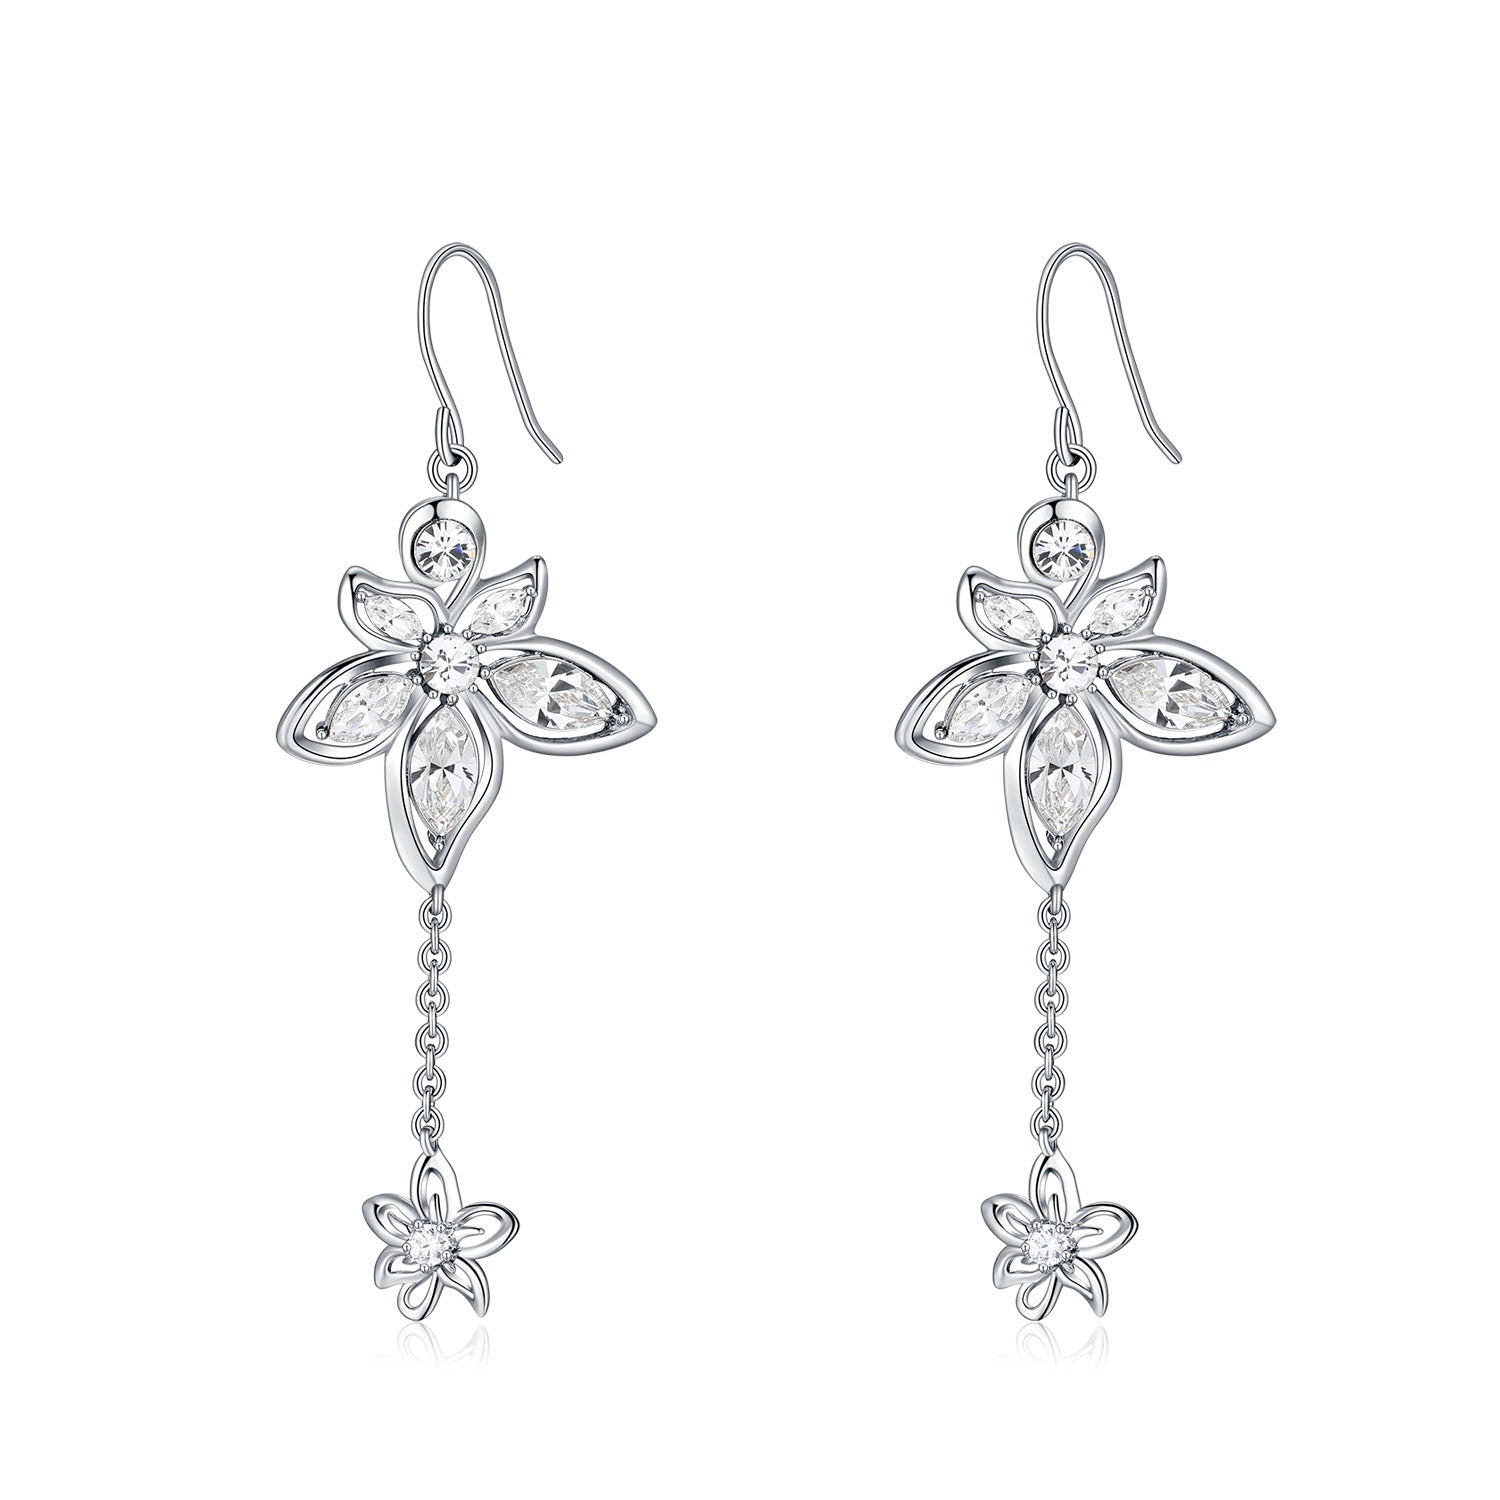 Vicacci 925 Silver Bauhinia Flower Earrings with Swarovski Crystals